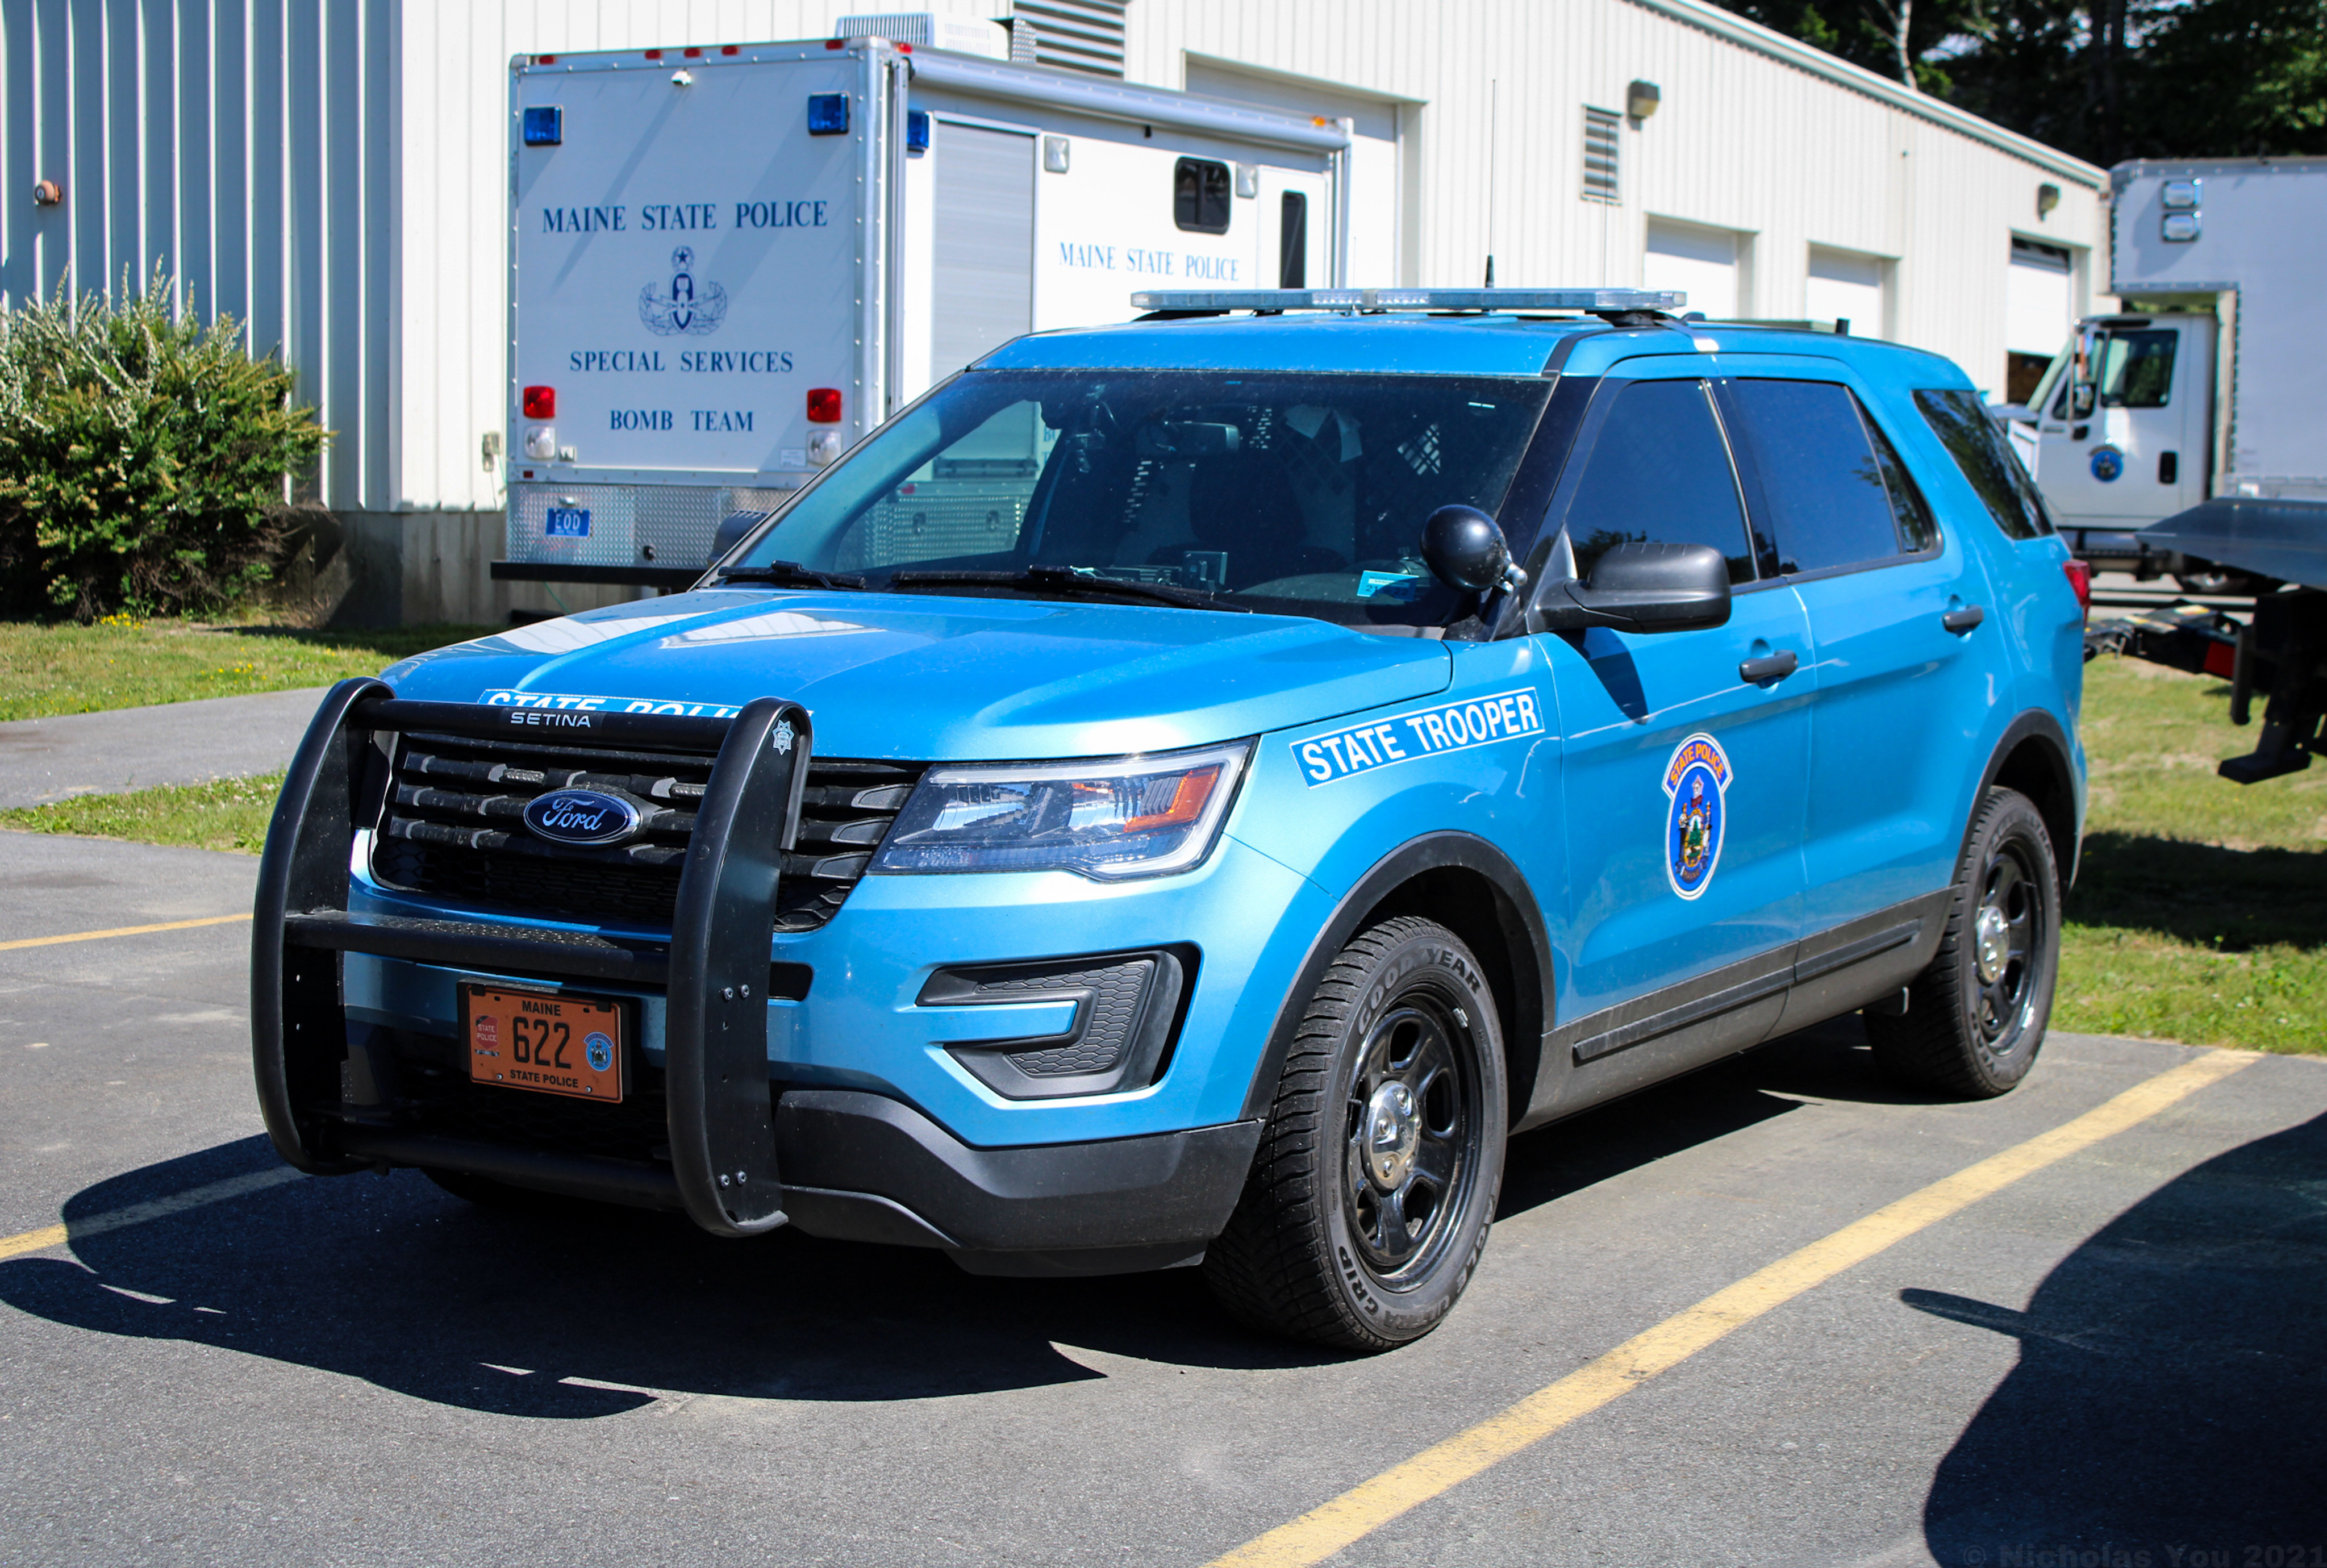 A photo  of Maine State Police
            Cruiser 622, a 2016-2019 Ford Police Interceptor Utility             taken by Nicholas You